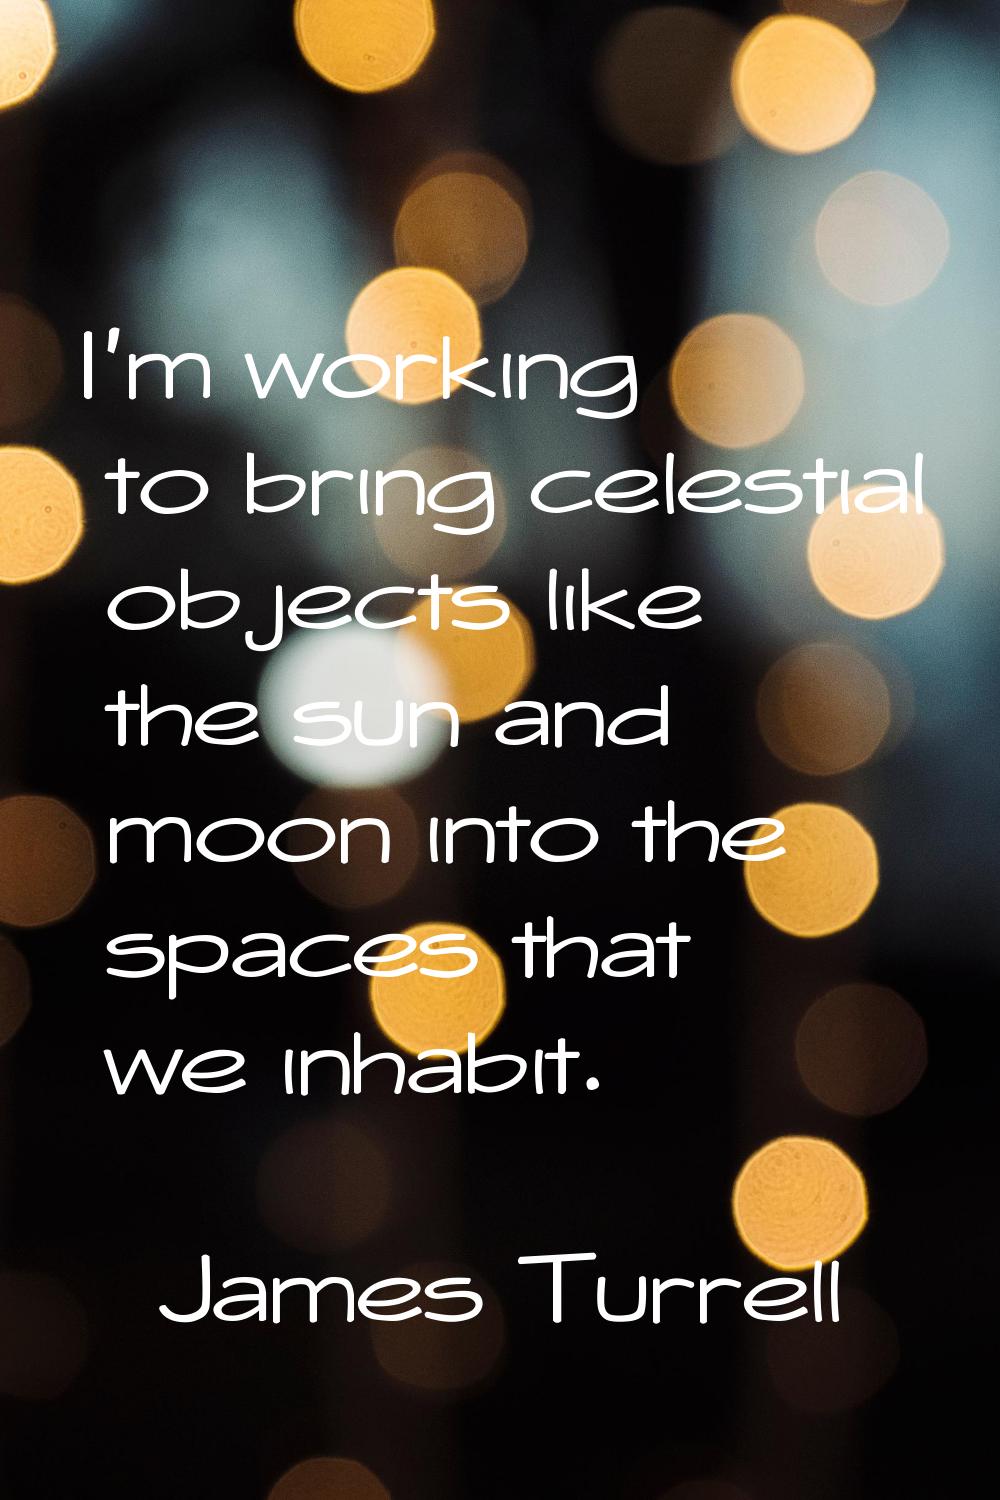 I'm working to bring celestial objects like the sun and moon into the spaces that we inhabit.